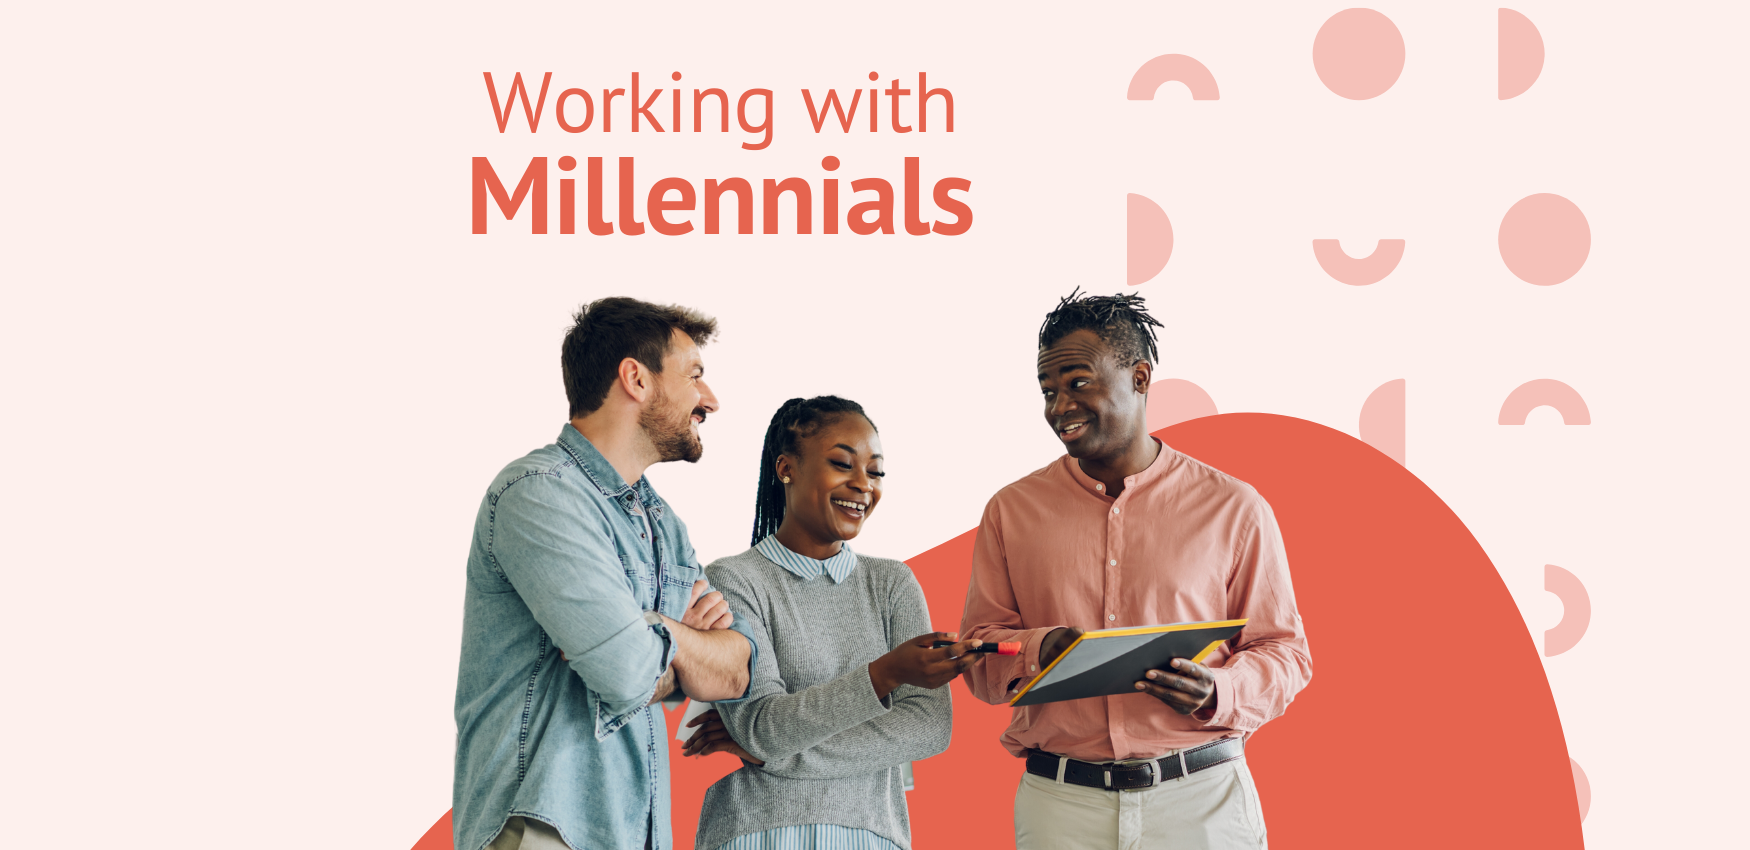 3 Things to Know When Working With Millennials